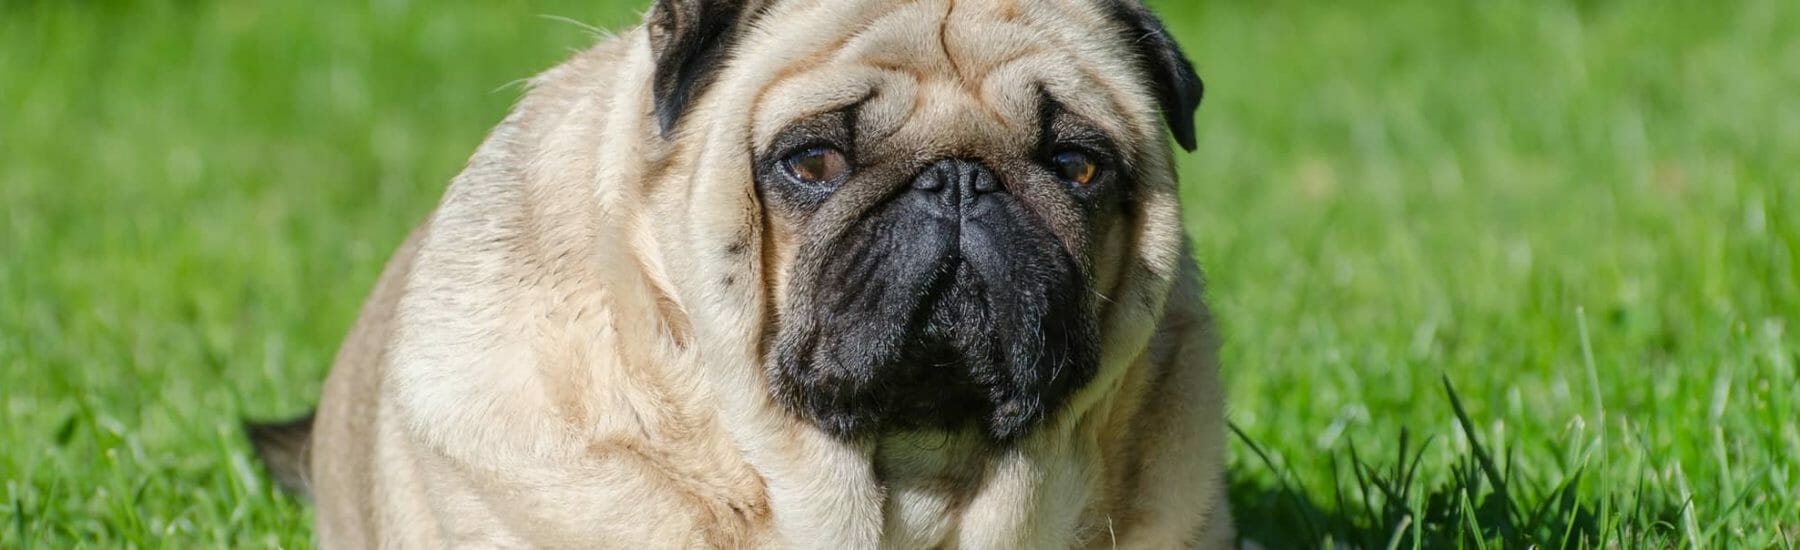 Large pug in the grass looking at camera